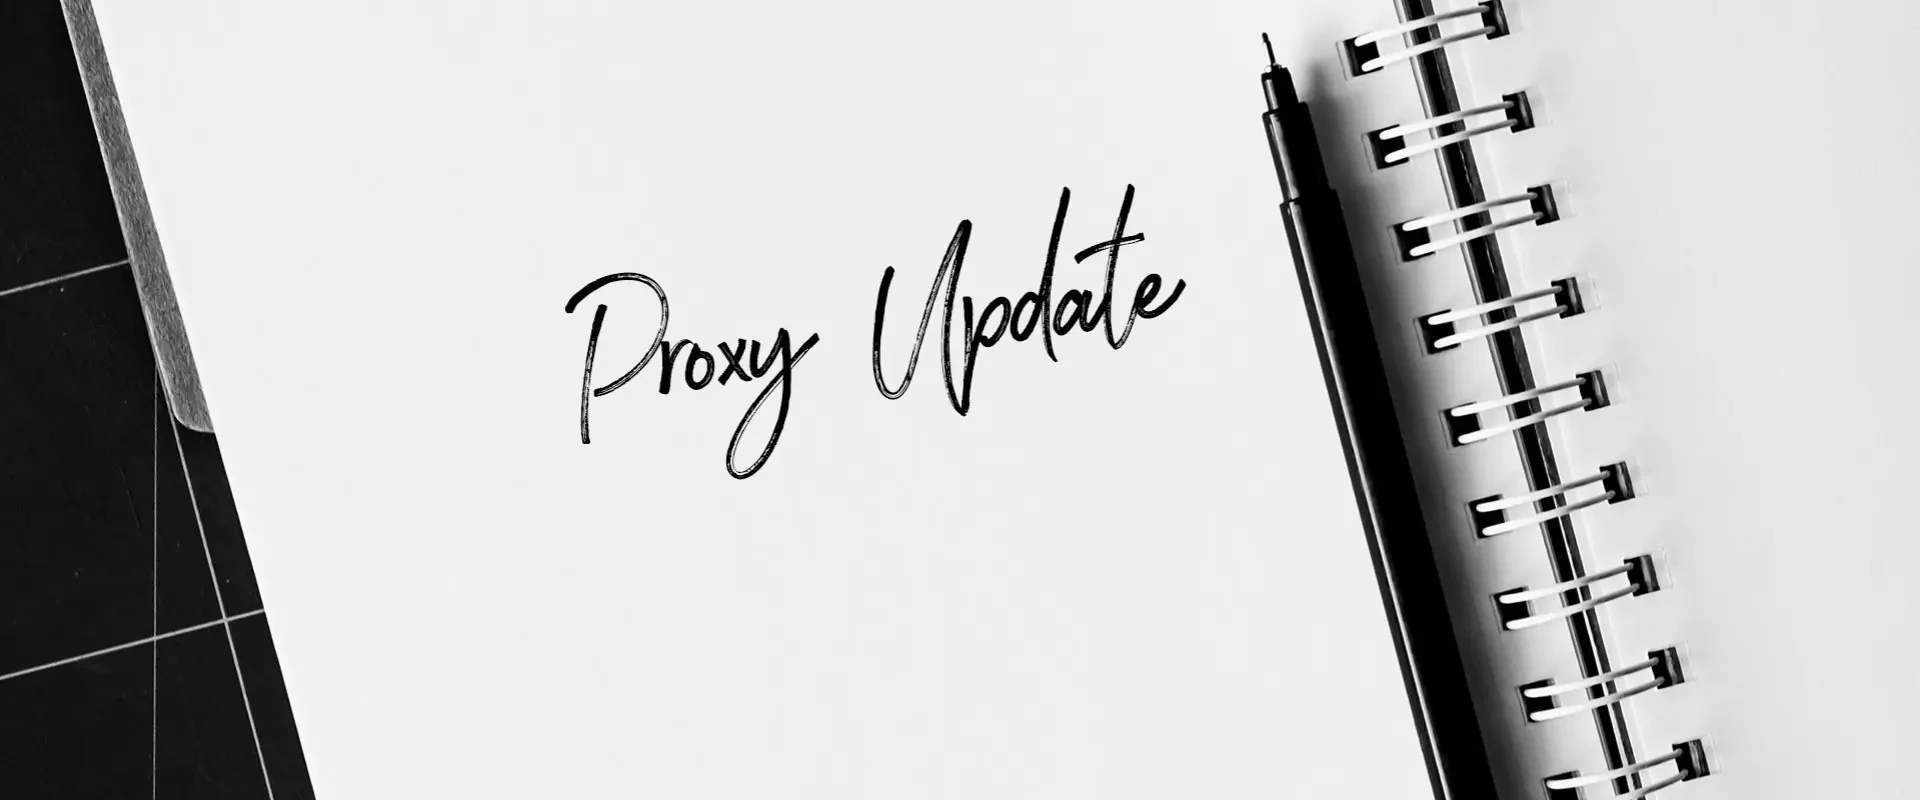 Proxy Update Canada: PROPOSED ISS BENCHMARK POLICY CHANGES FOR 2023